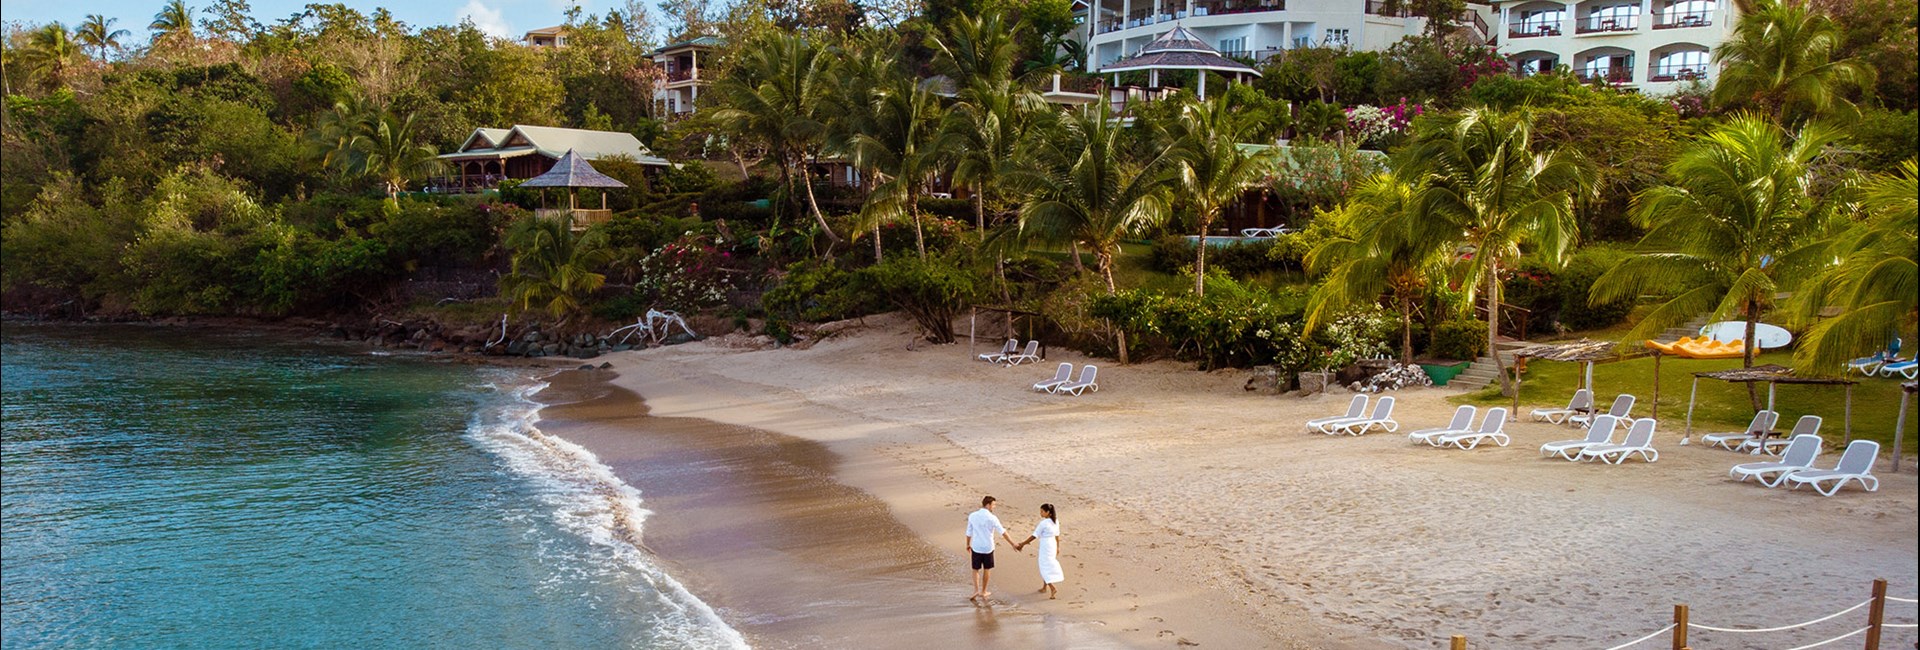 Couple on holiday walking along a beach at the tropical island of St Lucia 